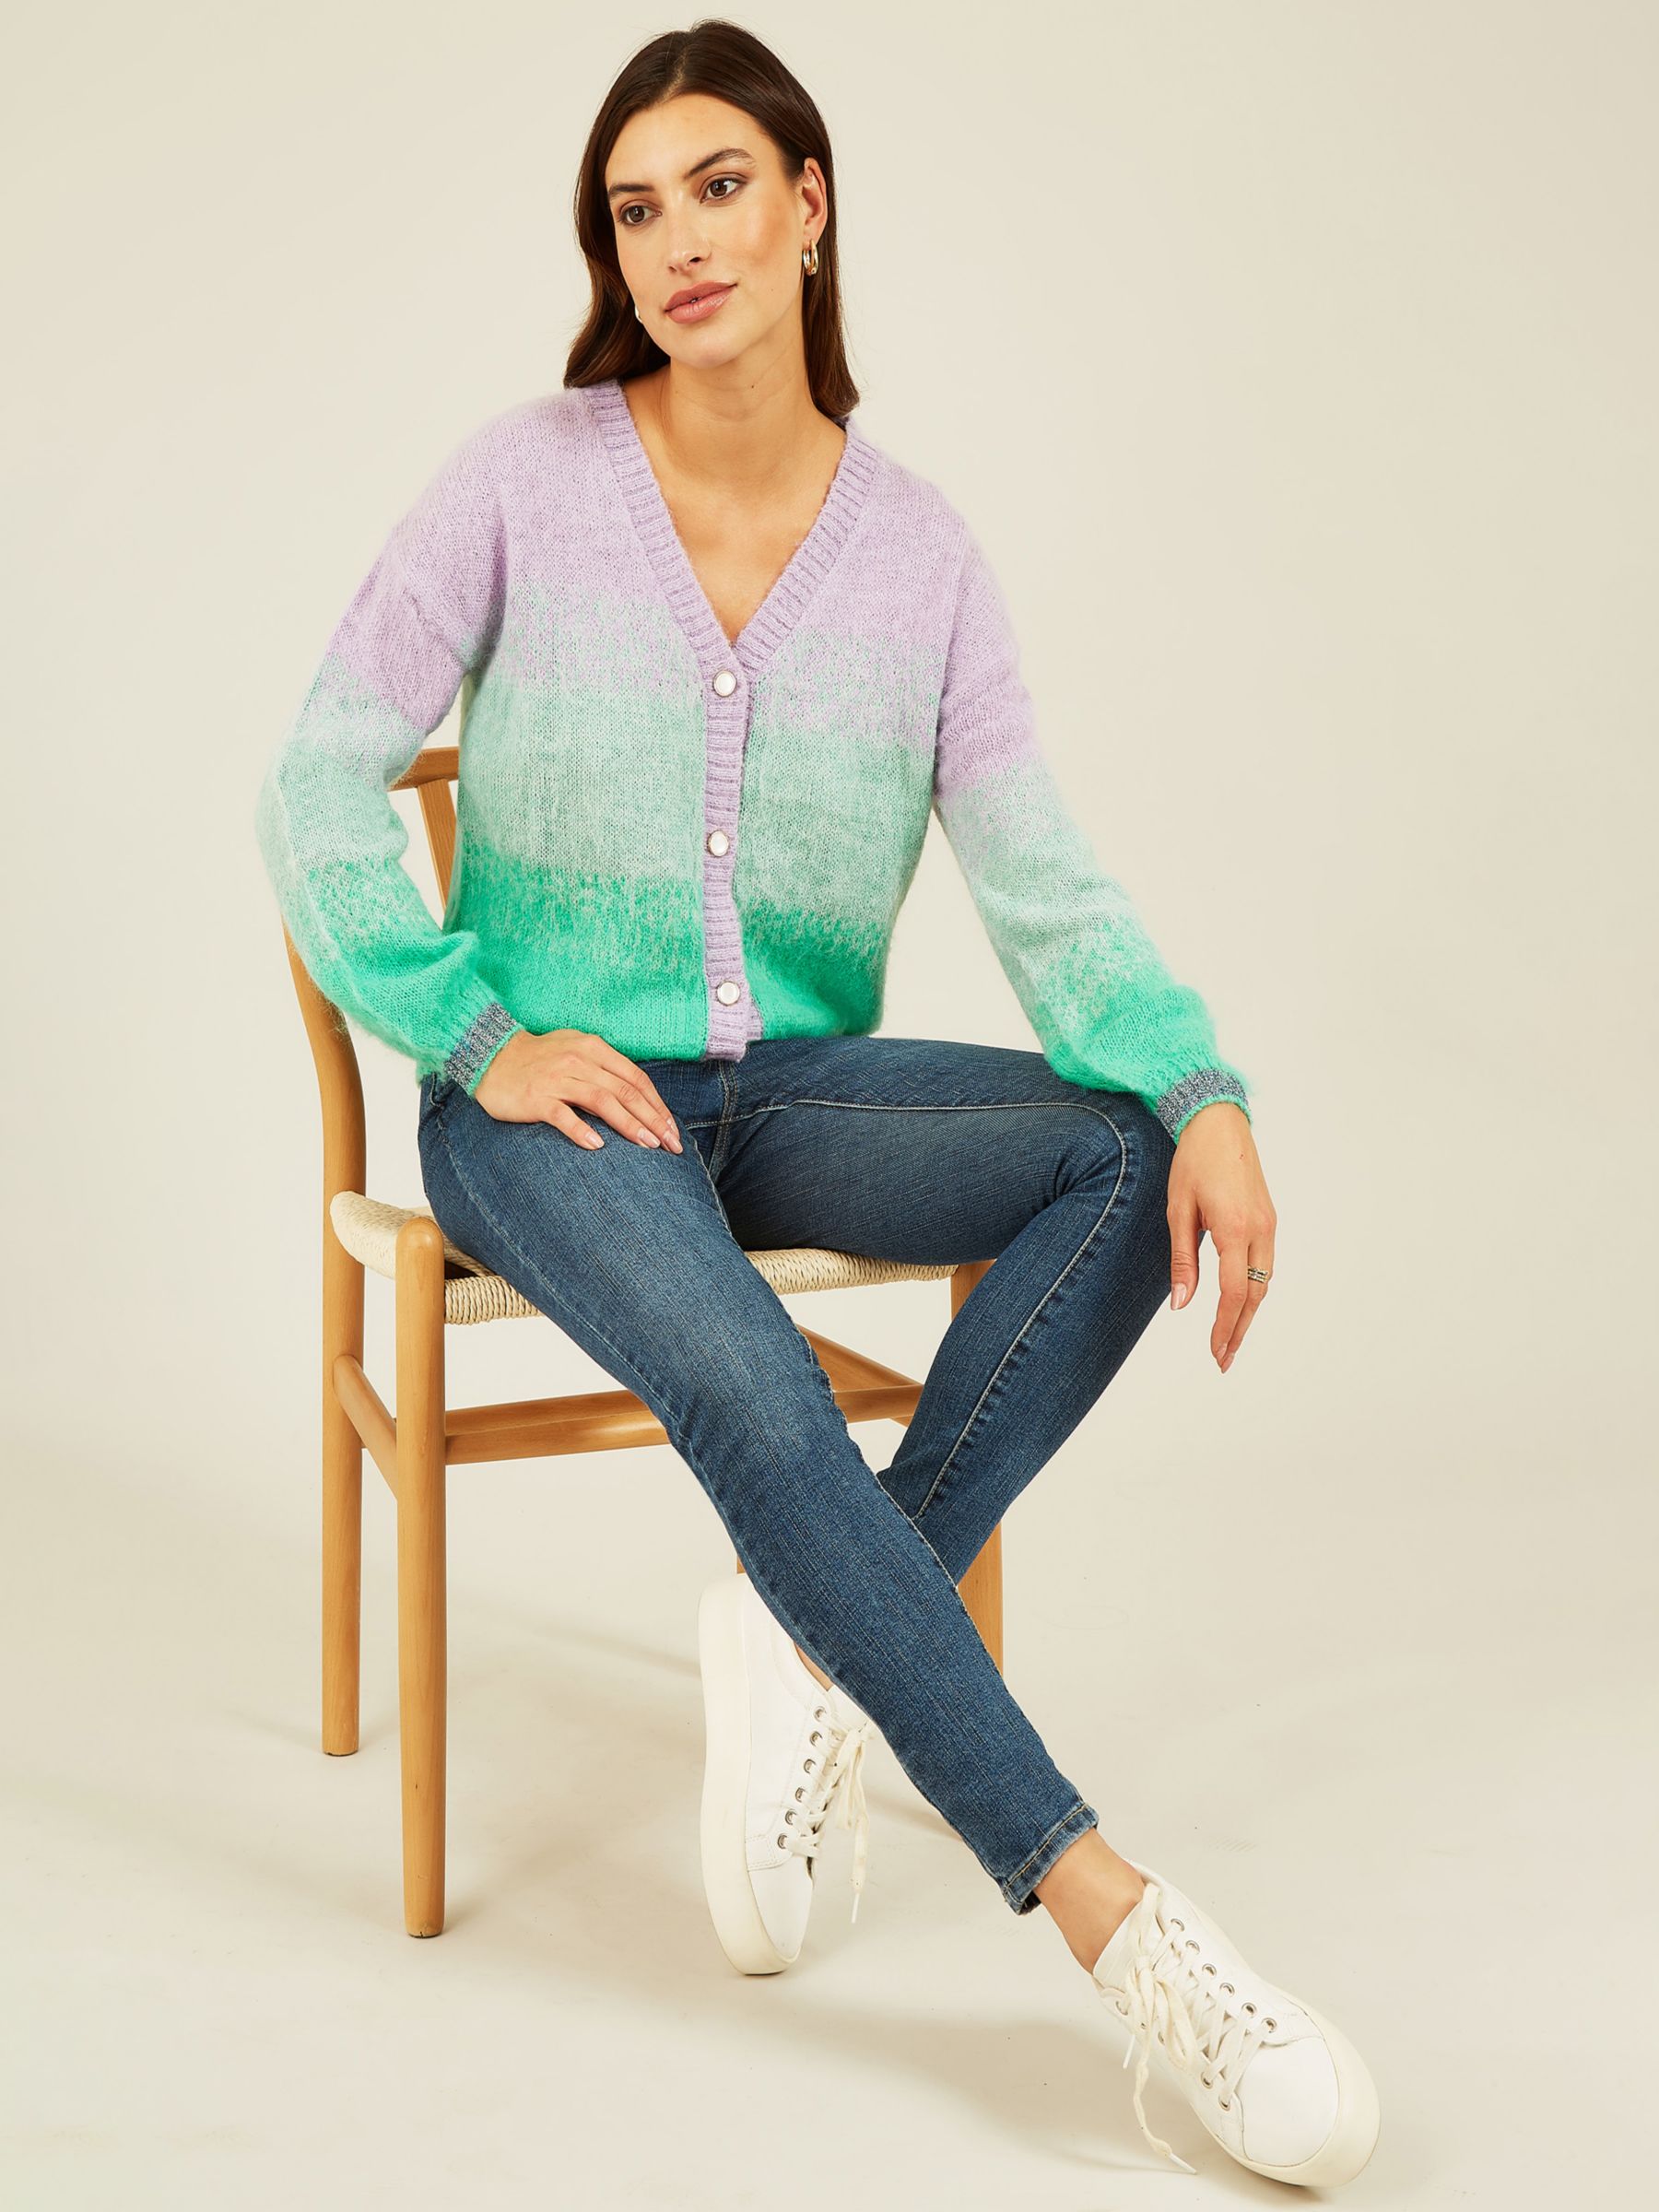 Buy Yumi Ombre Relaxed Fit Ombre Cardigan, Purple/Green Online at johnlewis.com